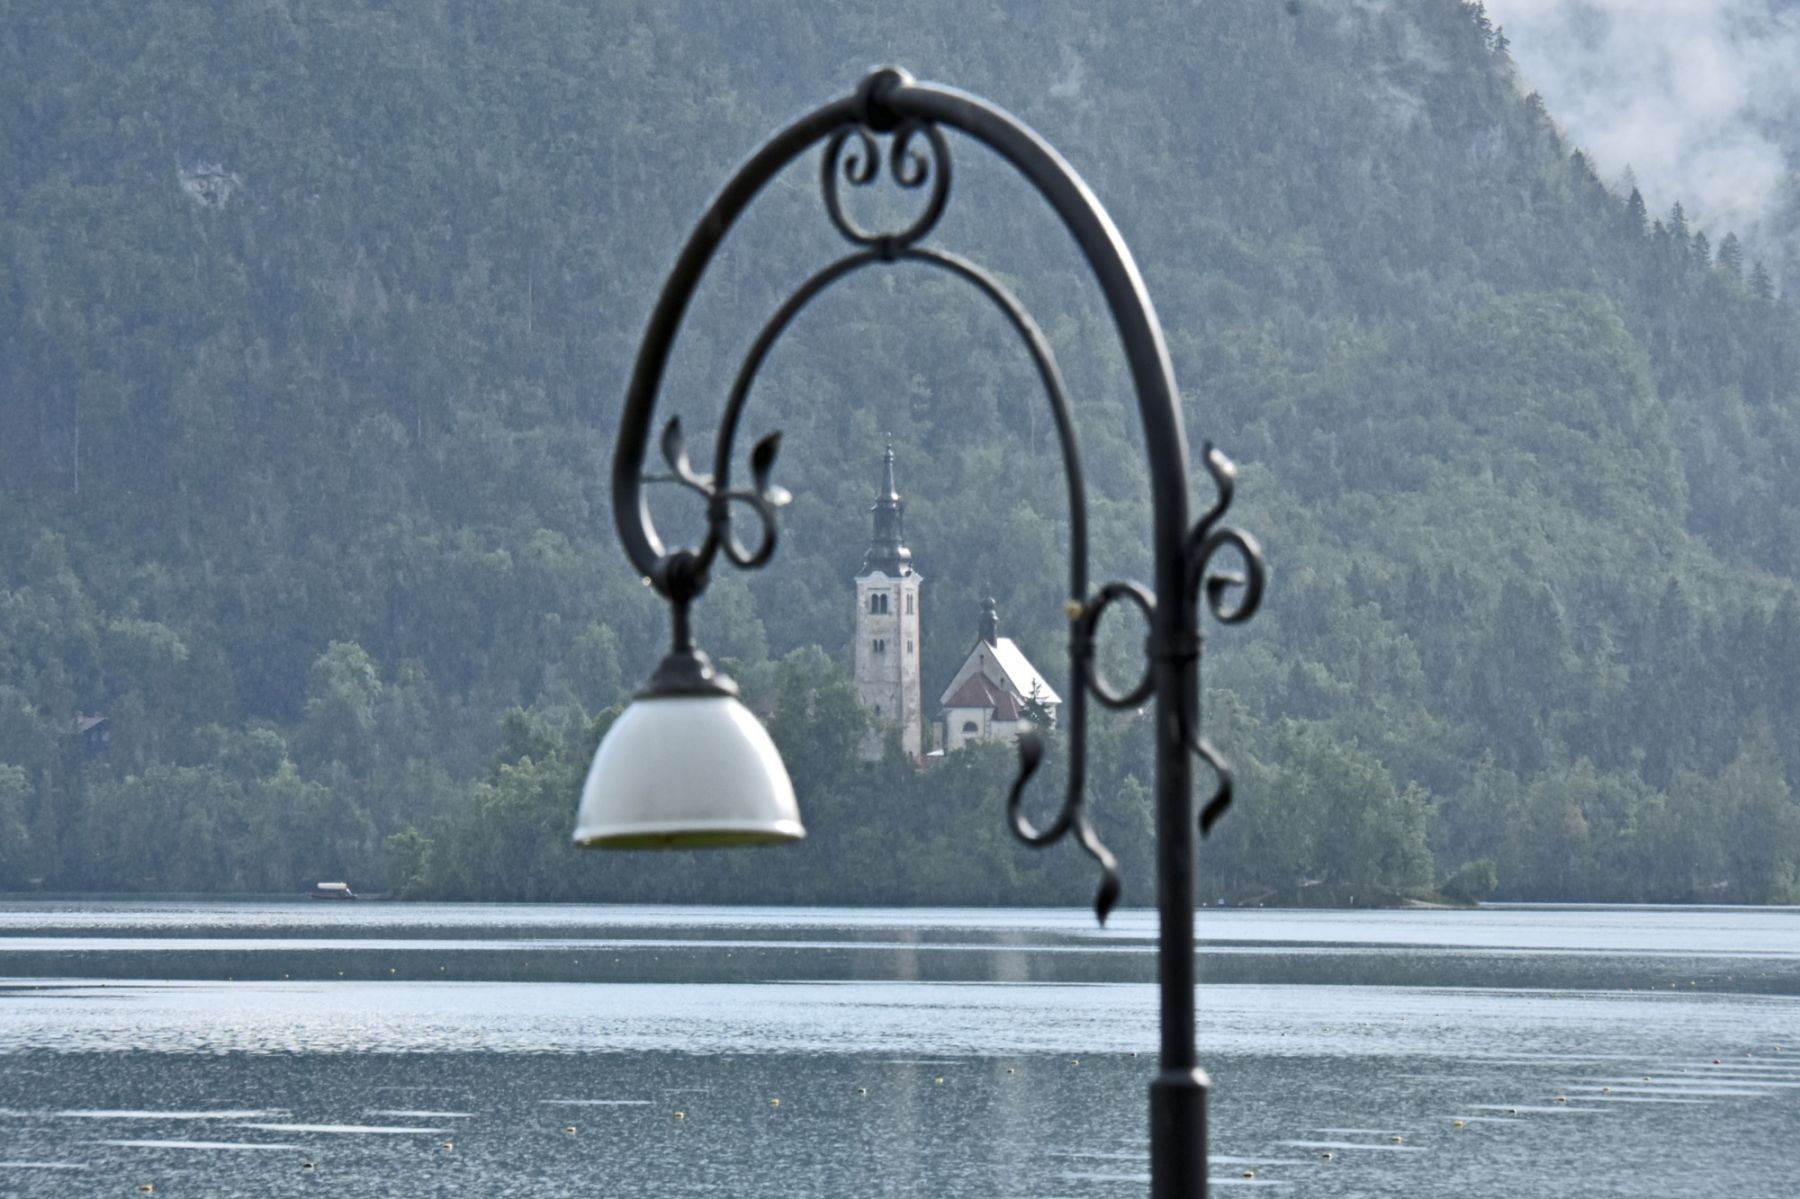 Bled, See